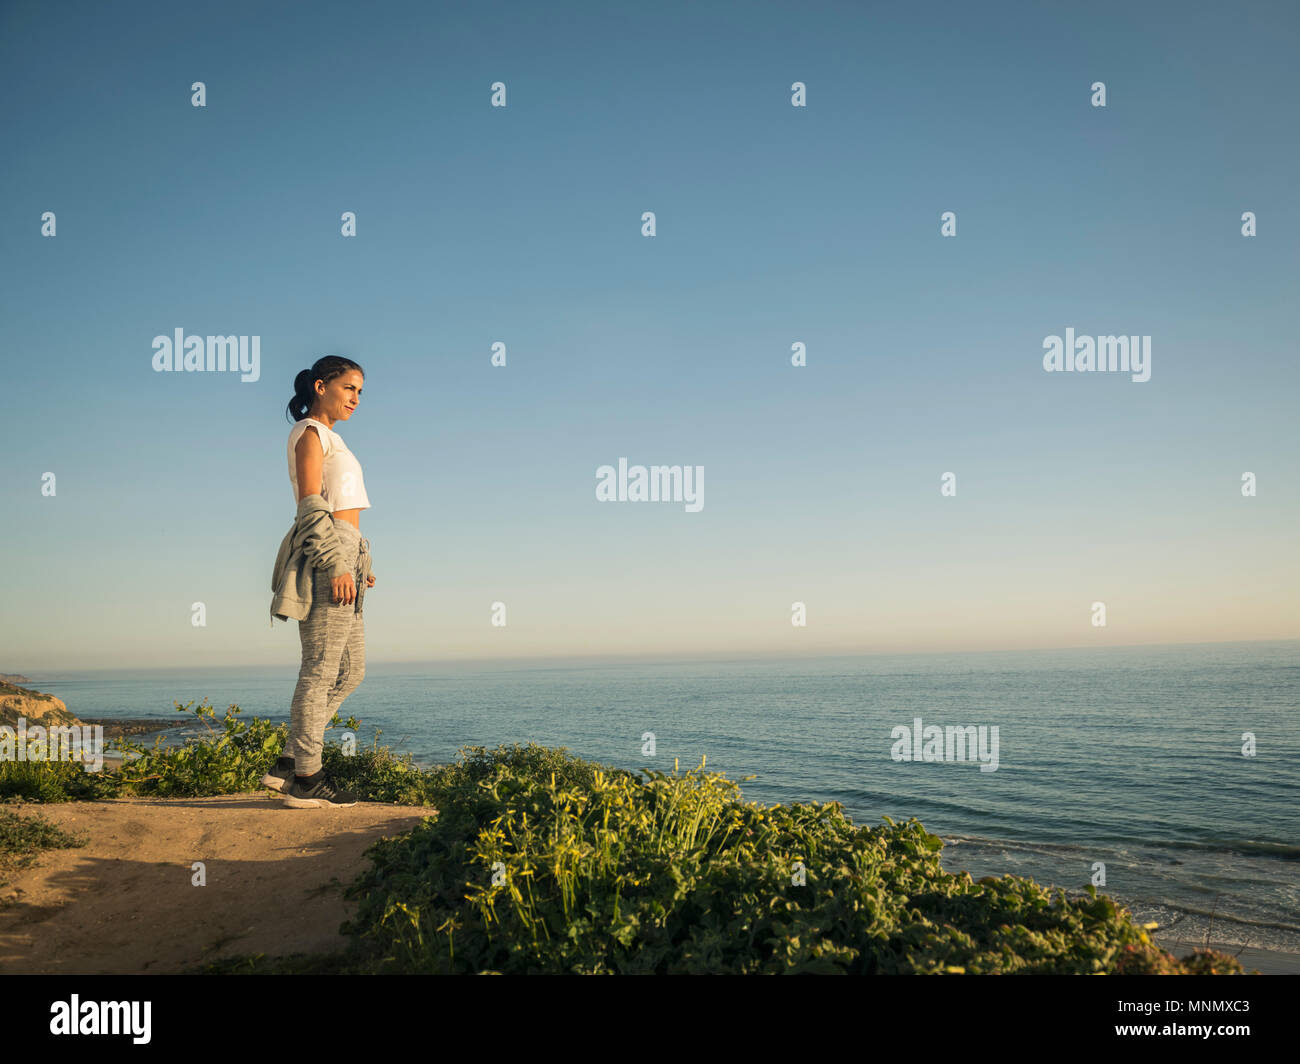 USA, California, Newport Beach, Woman standing on cliff and looking at view Stock Photo